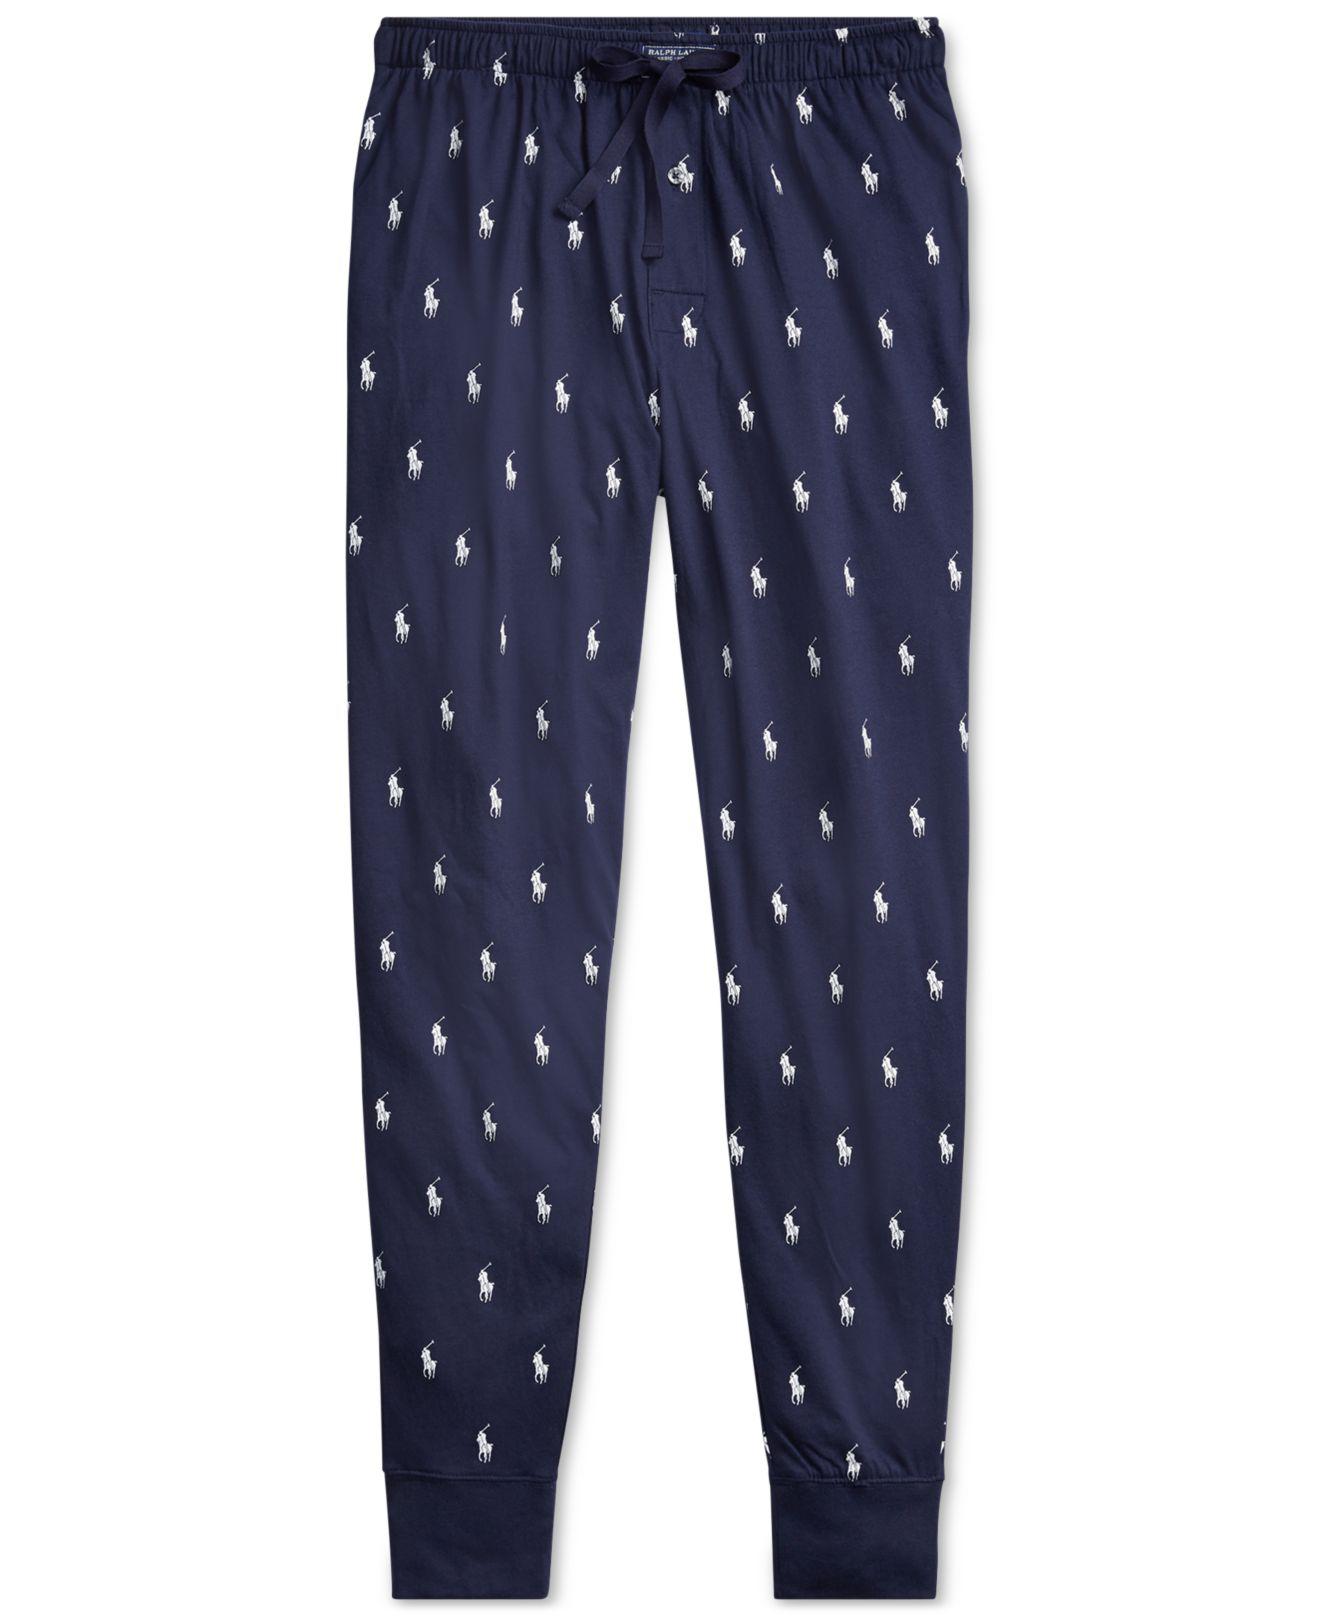 Polo Ralph Lauren Cotton Pony Print Pajama Jogger Pants in Navy (Blue) for  Men - Save 55% - Lyst